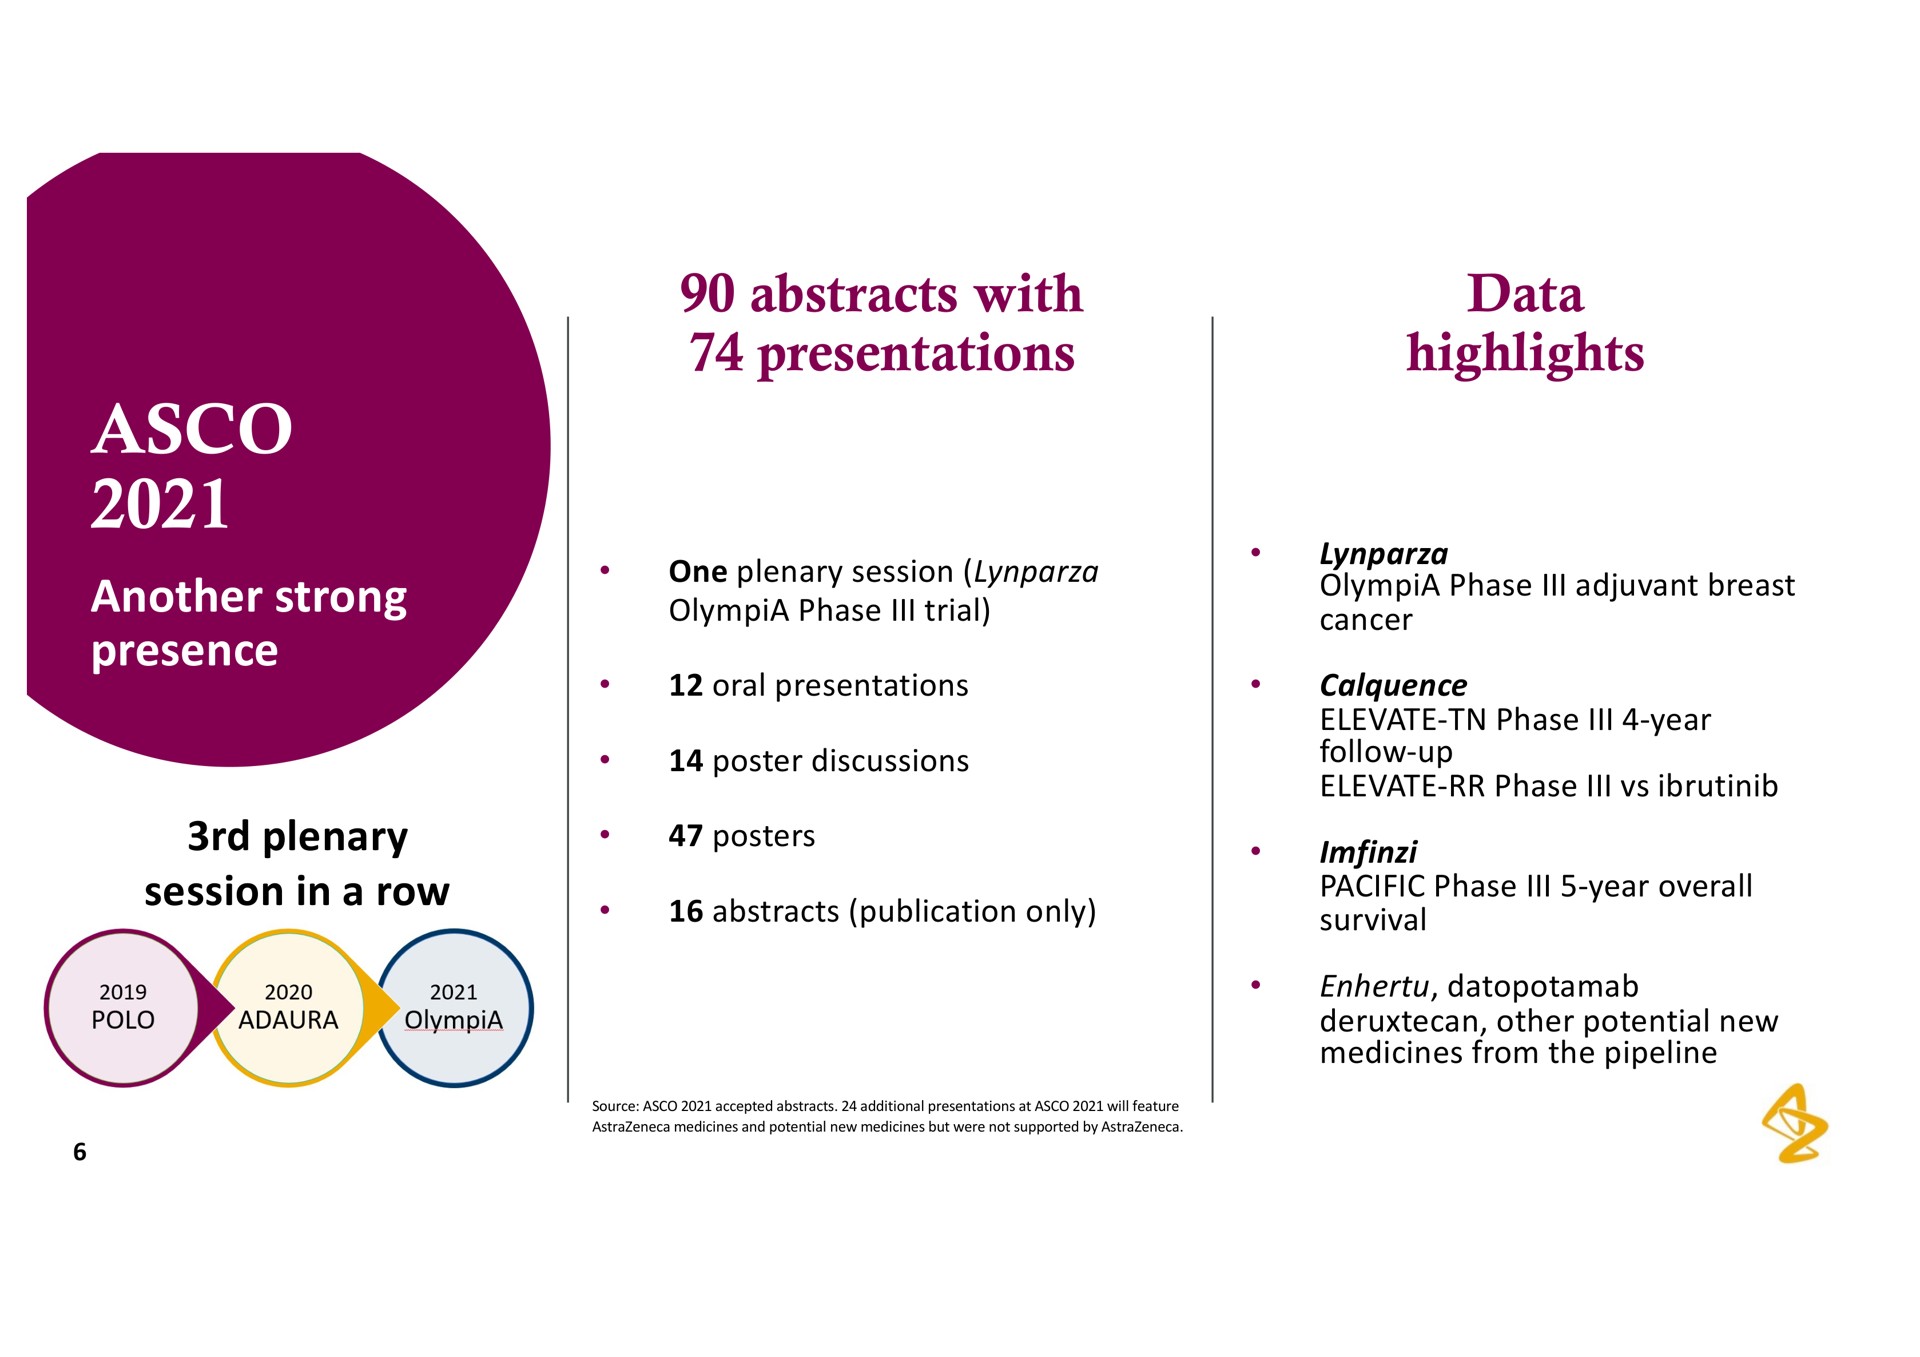 abstracts with presentations highlights | AstraZeneca